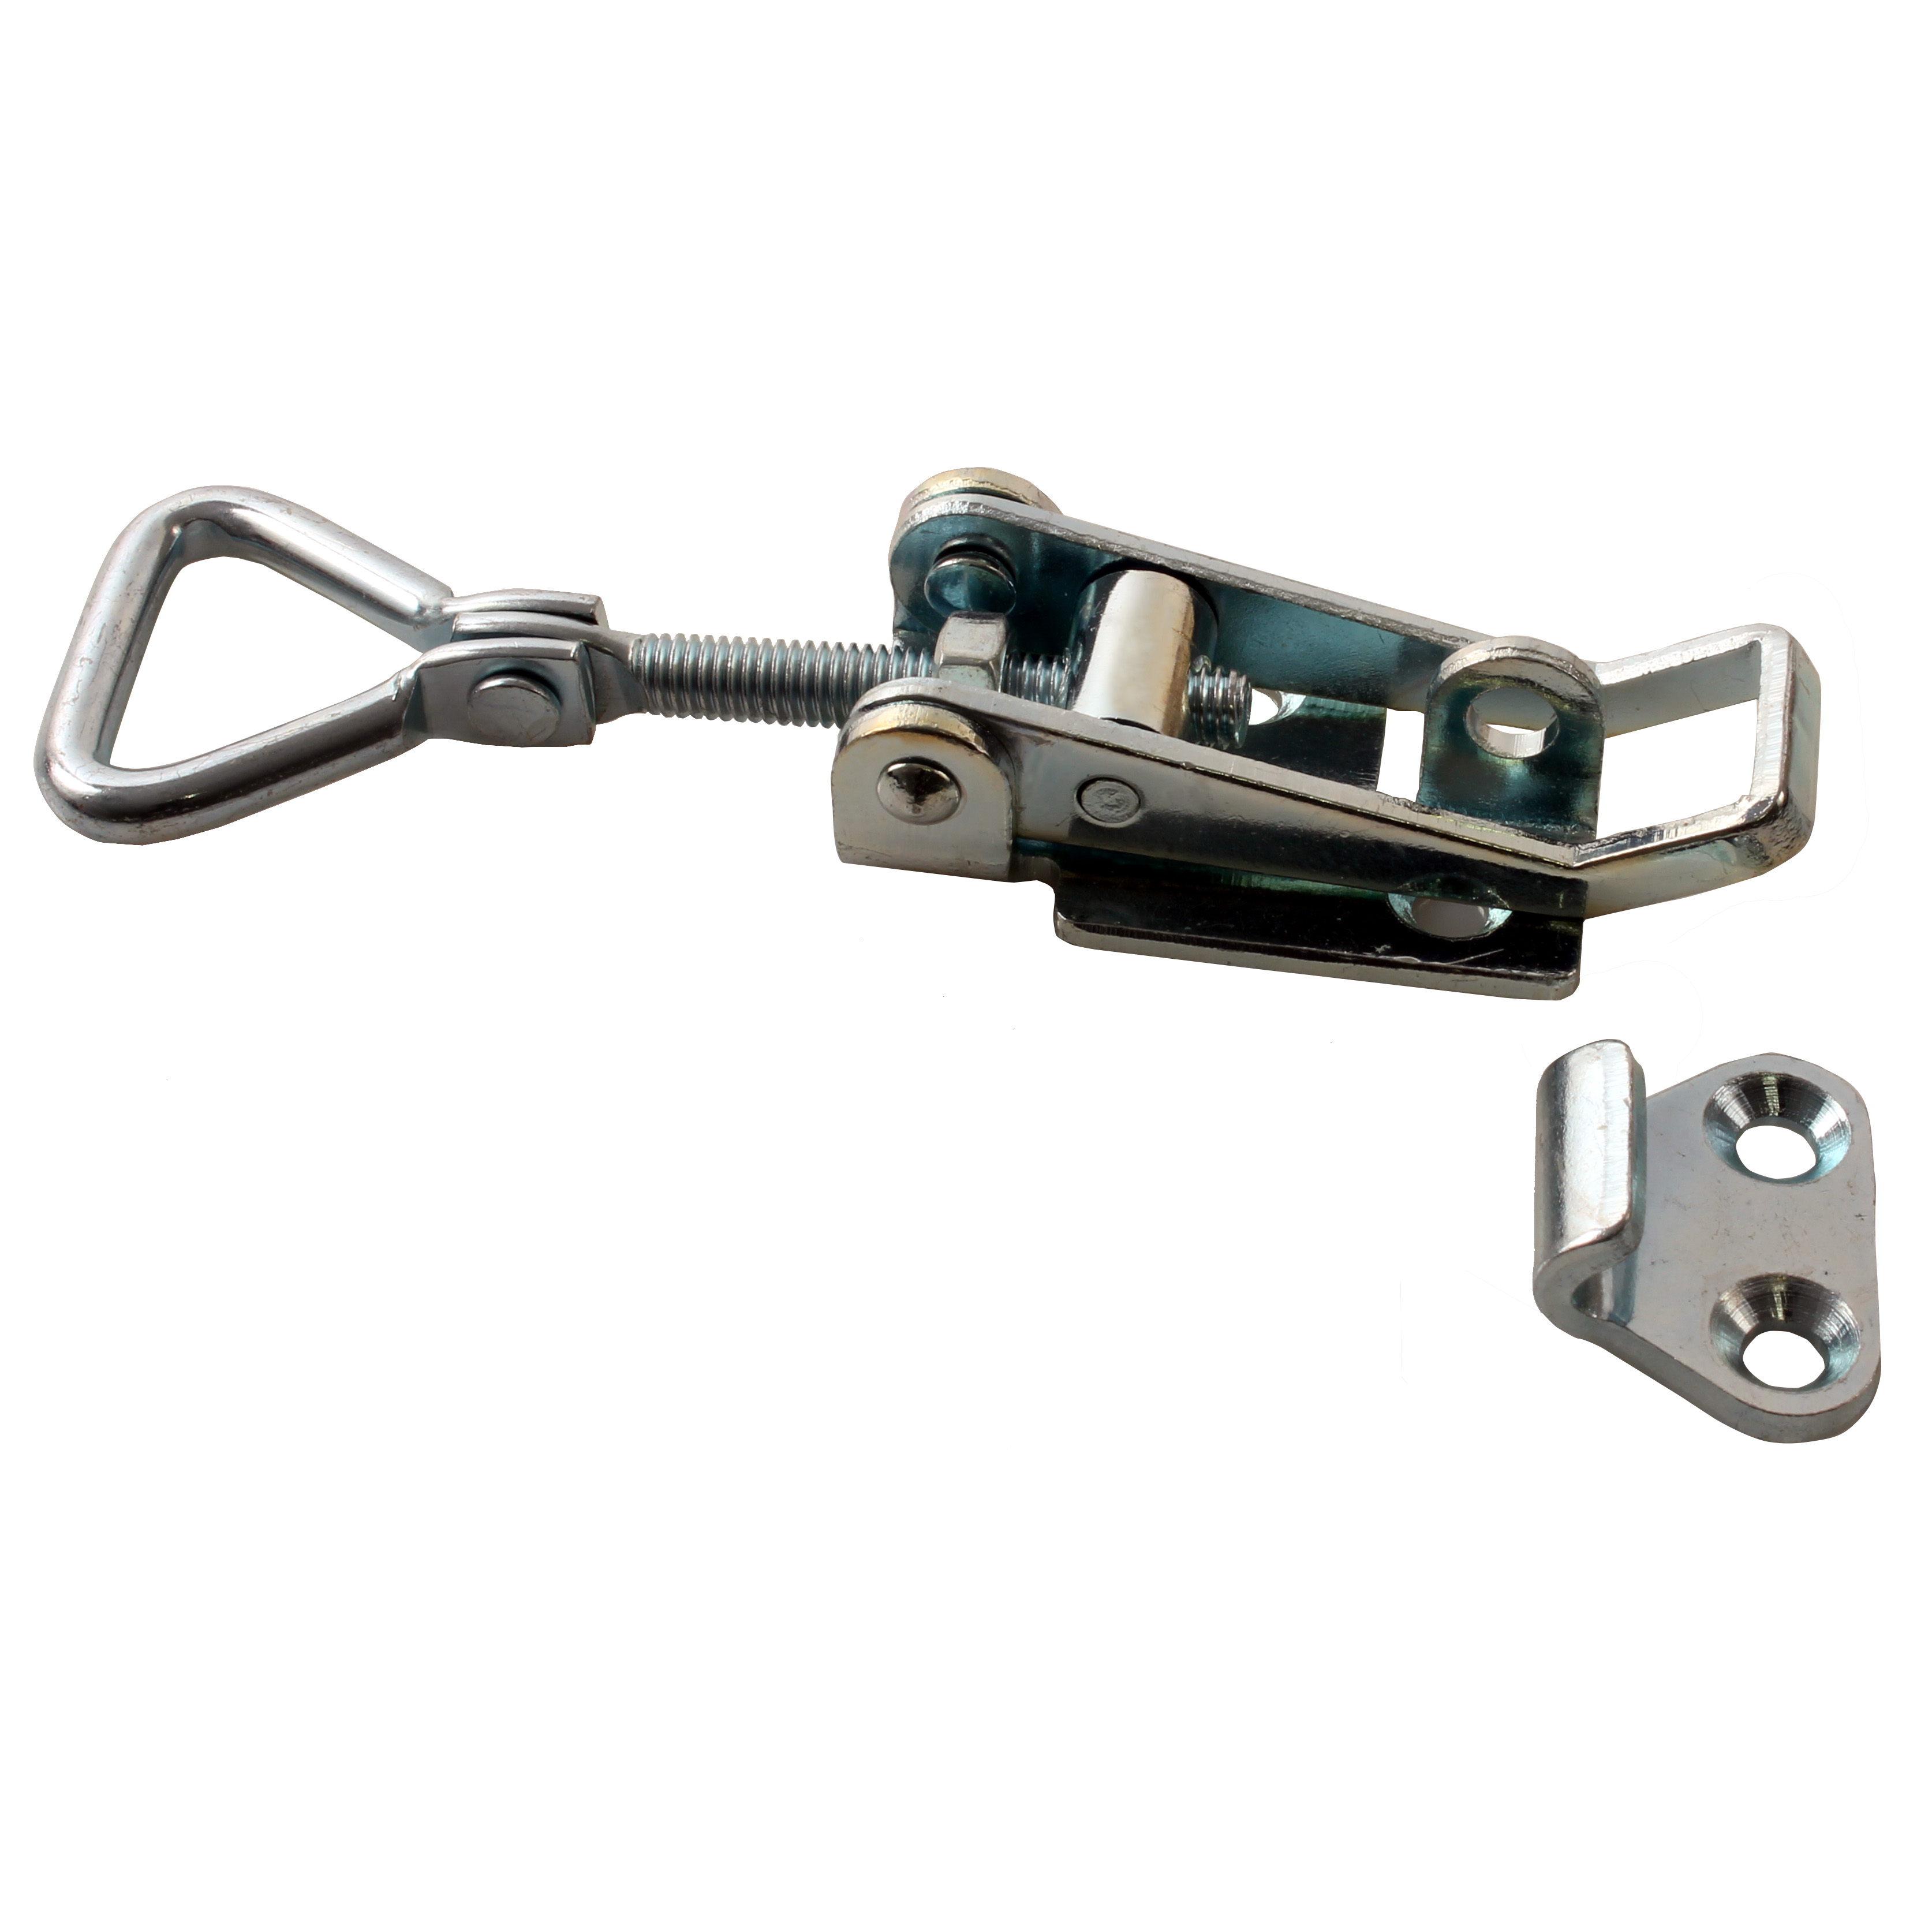 Adjustable latch clamp with strike plate - Stroke from 106,7mm to 121,4mm - With padlock holder - 